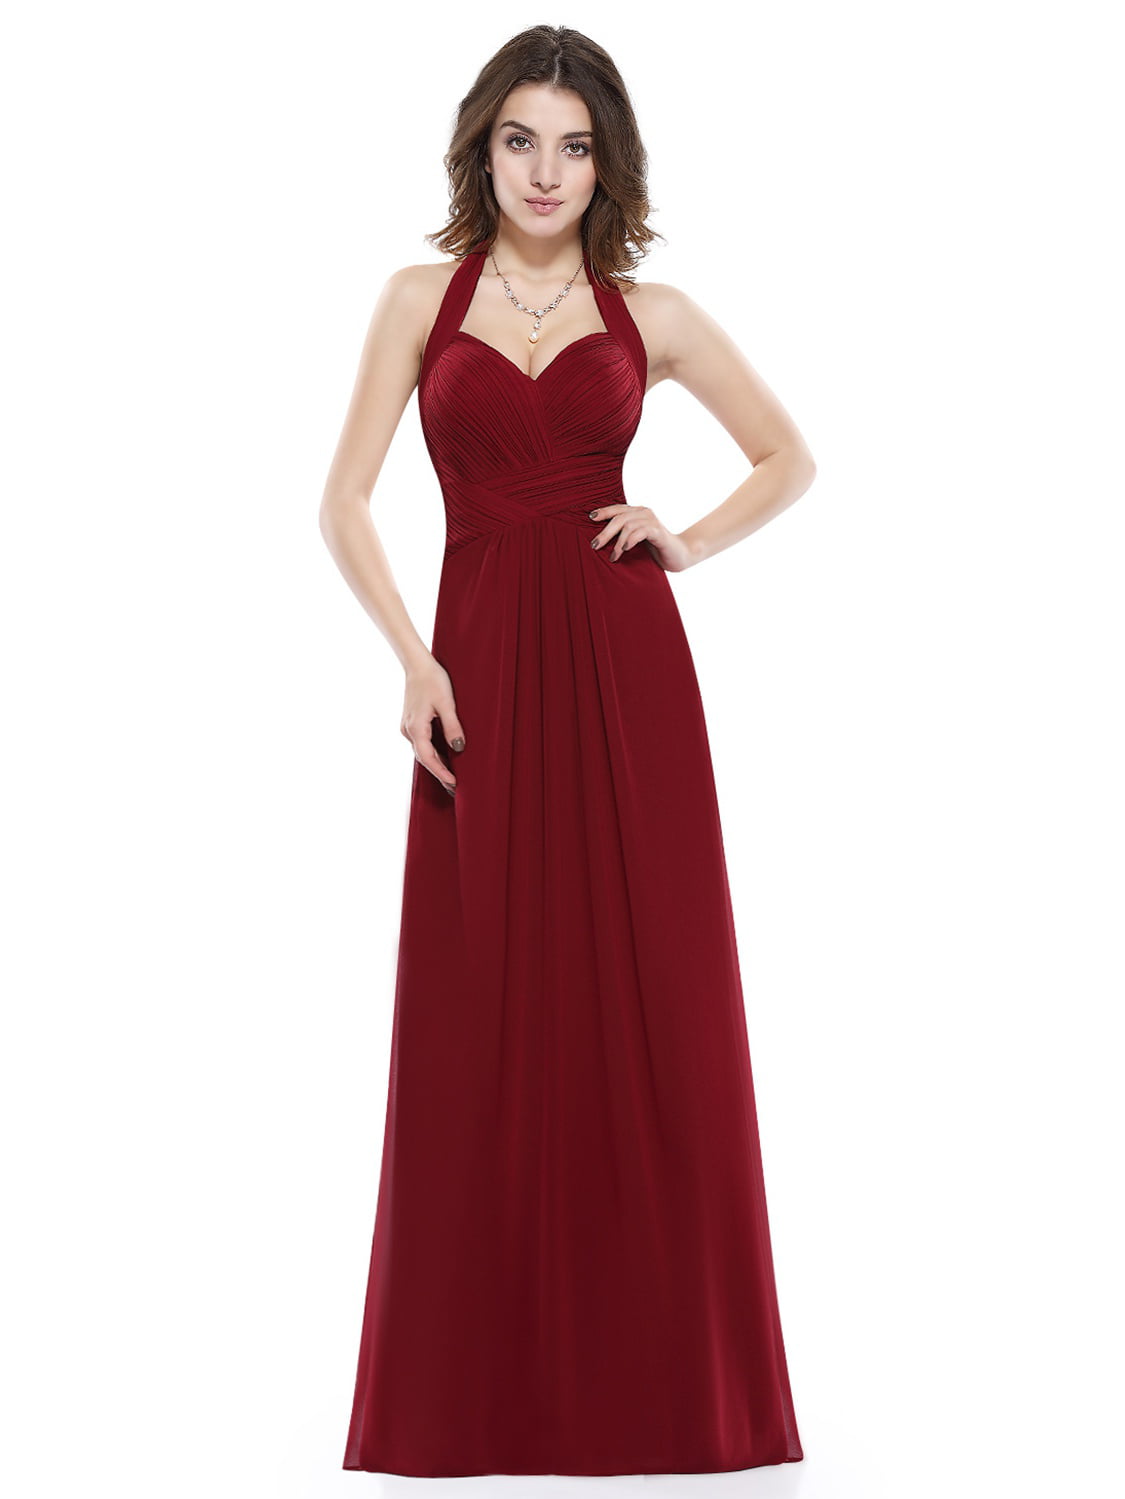 Ever-Pretty Backless Long Evening Gown Halter V-neck Bridesmaid Dresses 08487 